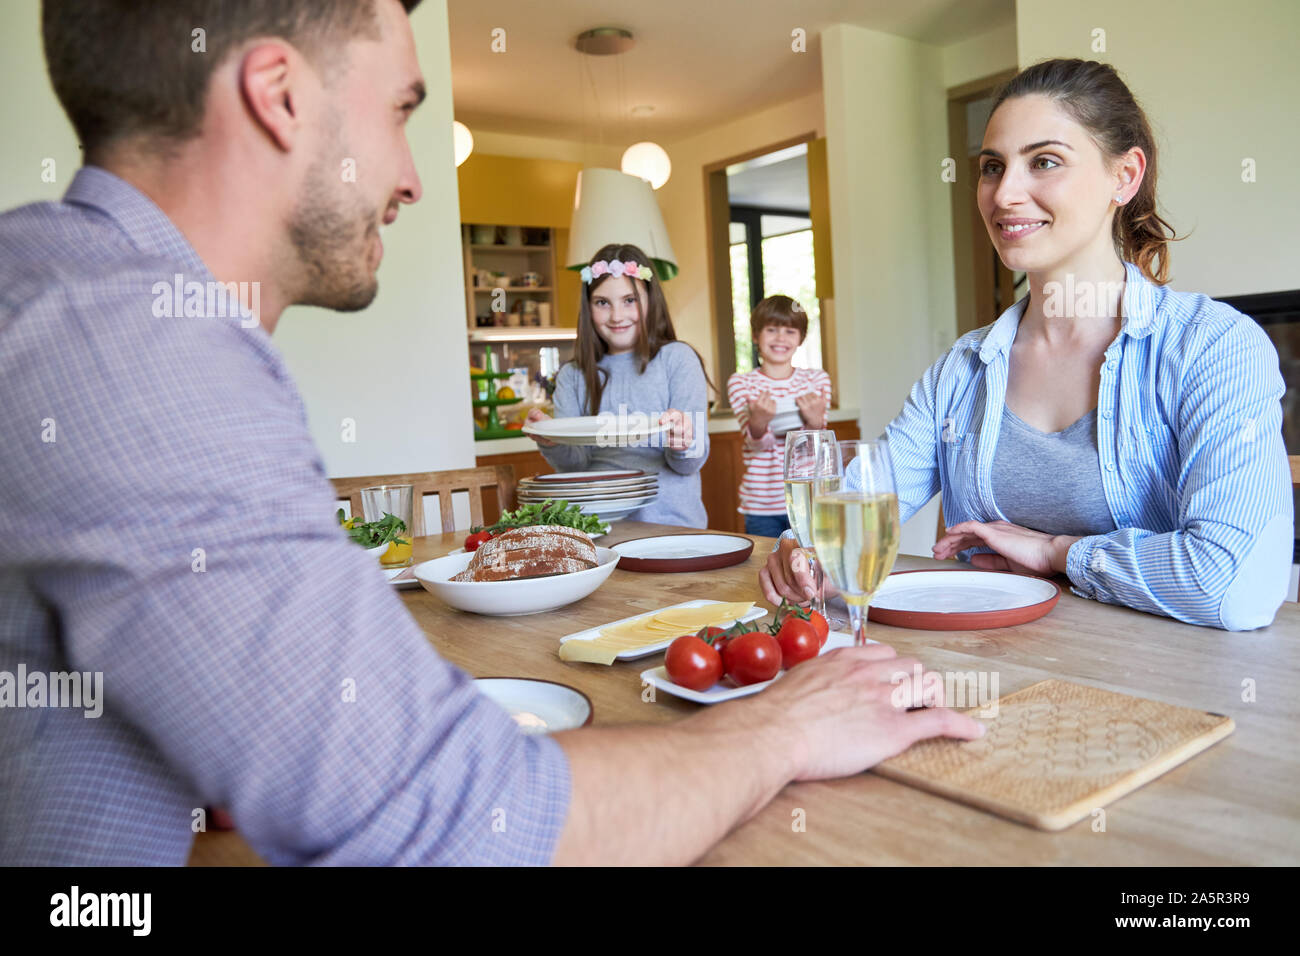 Children help parents in the household and bring plates of food to the table Stock Photo